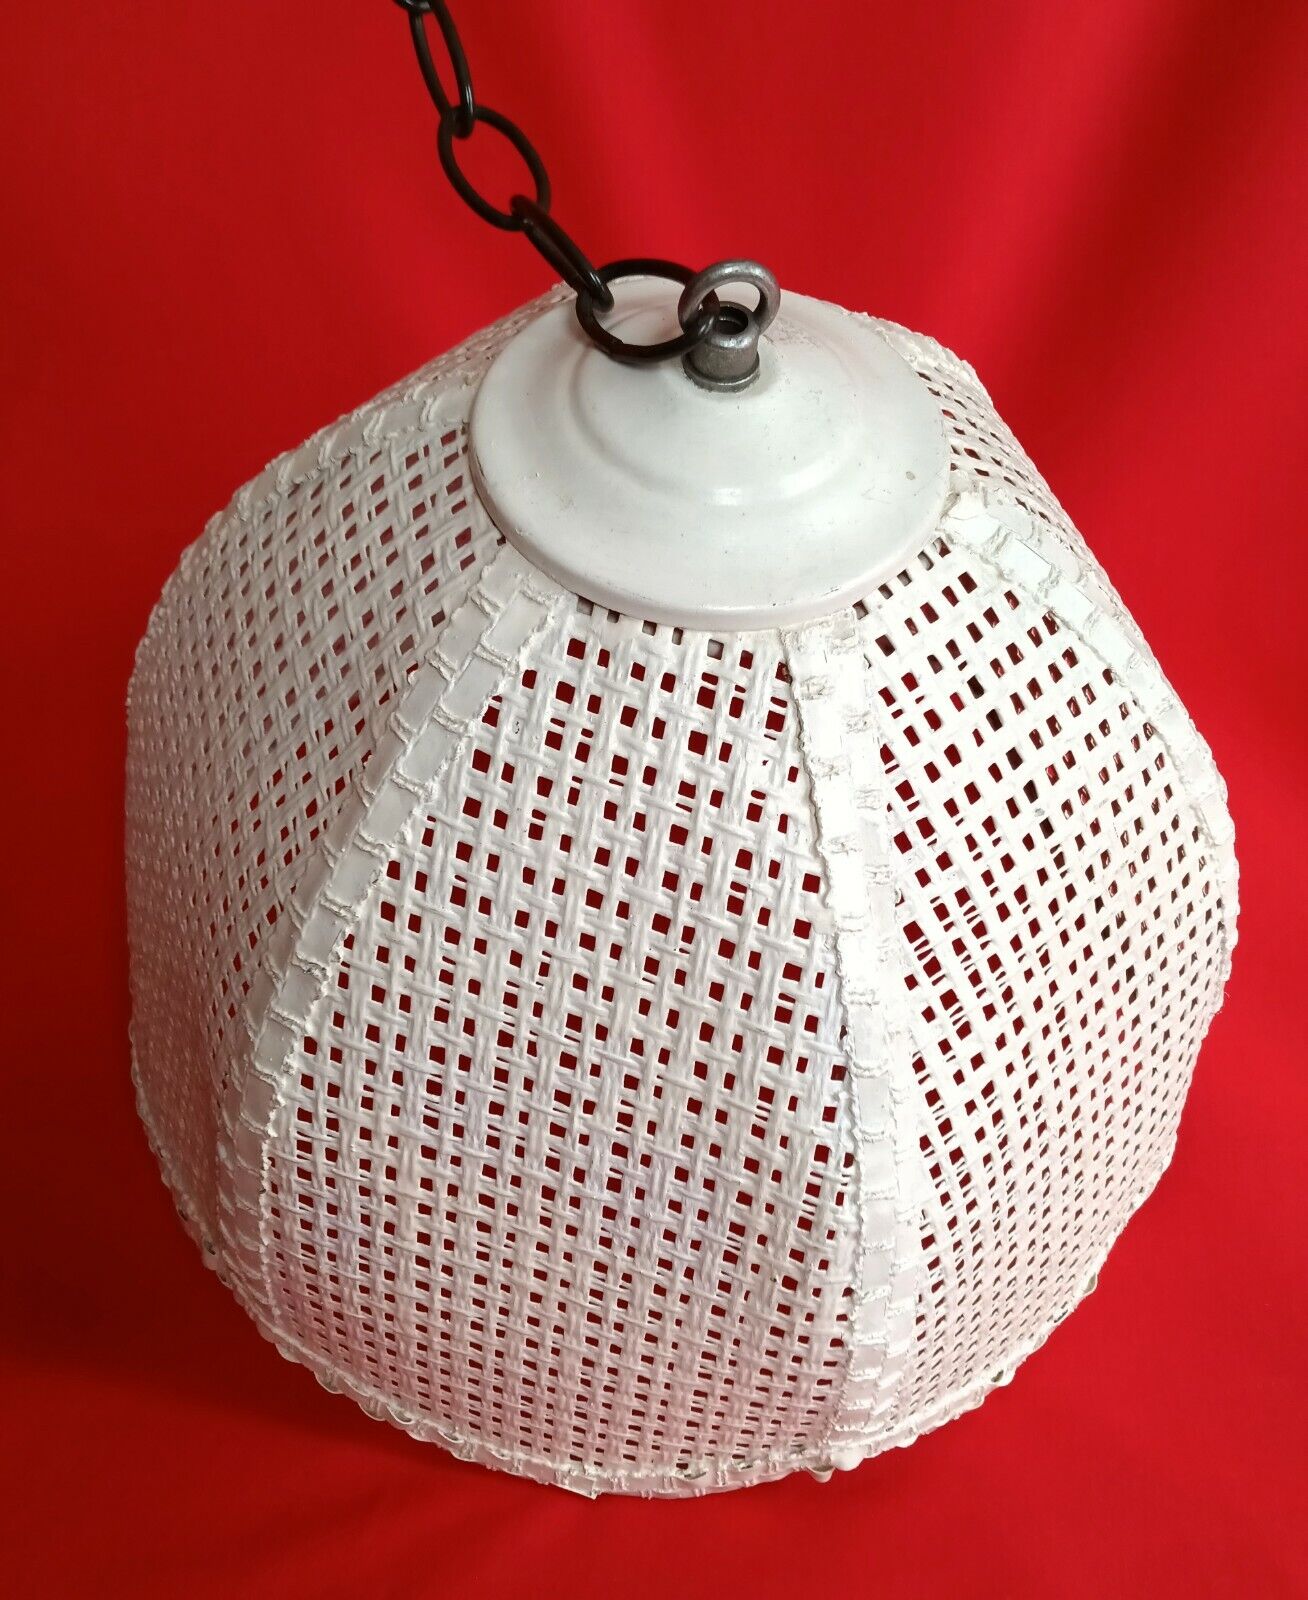 Wicker Rattan Pendant Hanging Lampshade Bell-Shaped Metal Chain White Painted